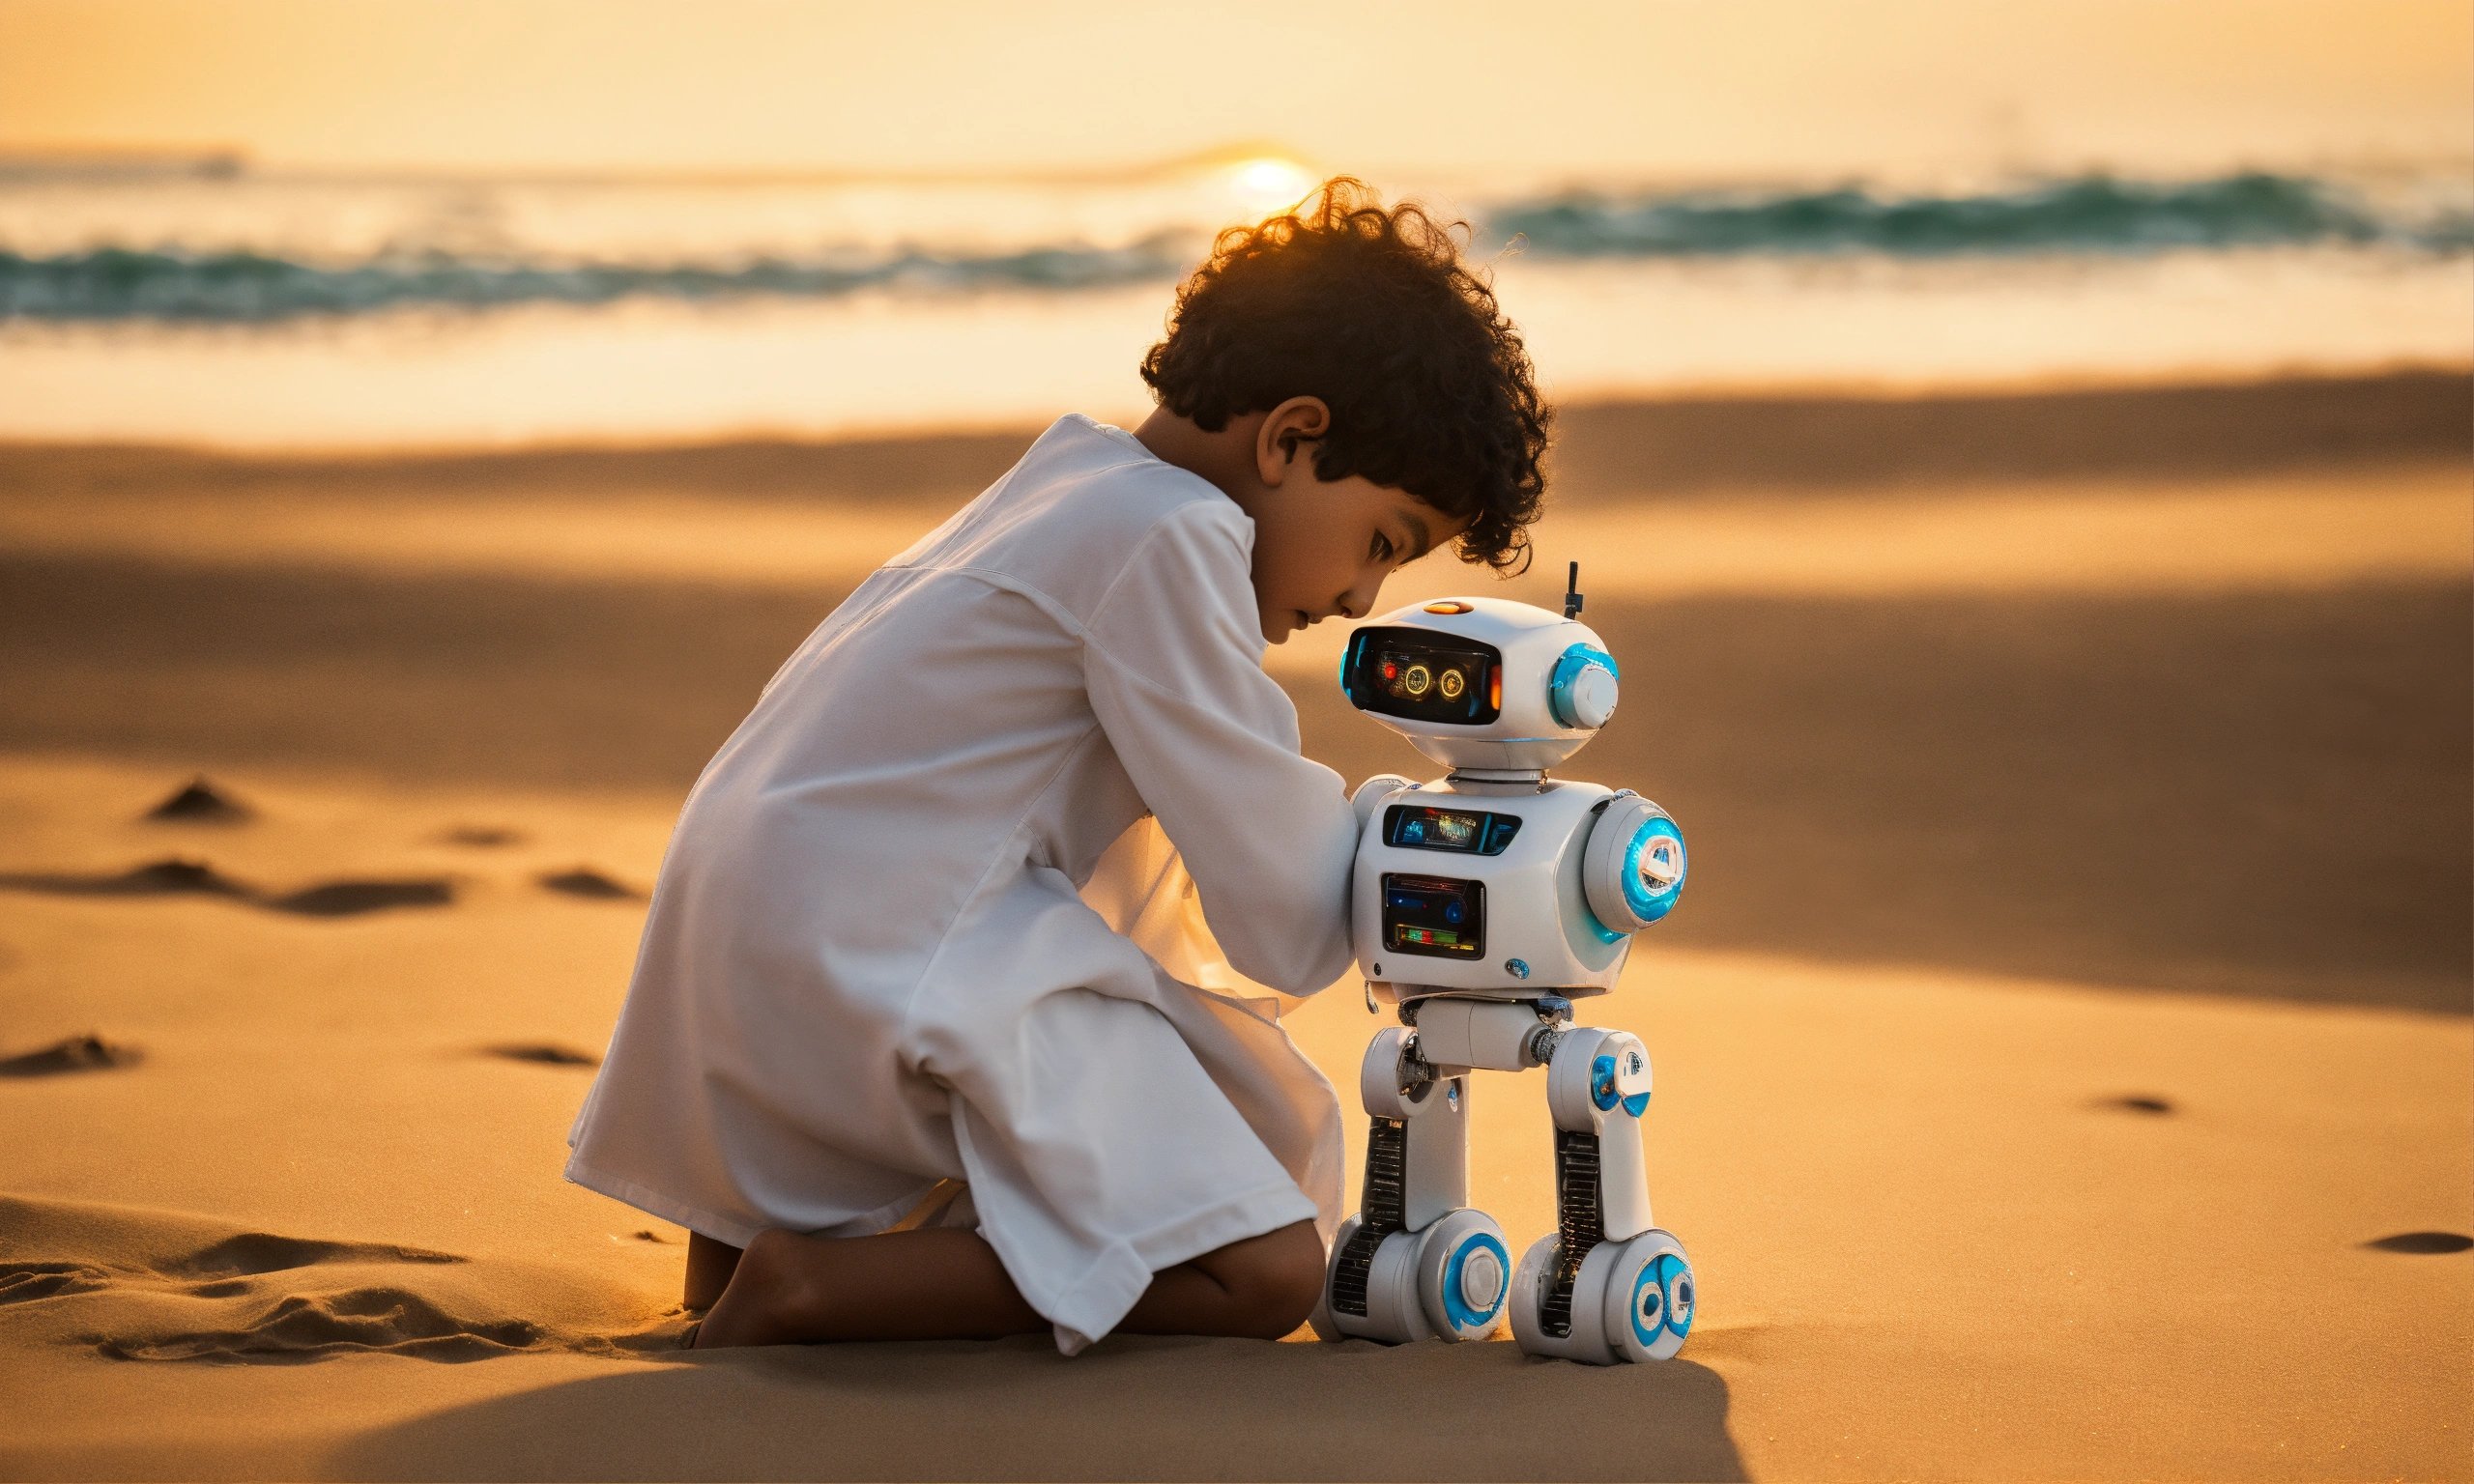 Coding Robots for Elementary Students